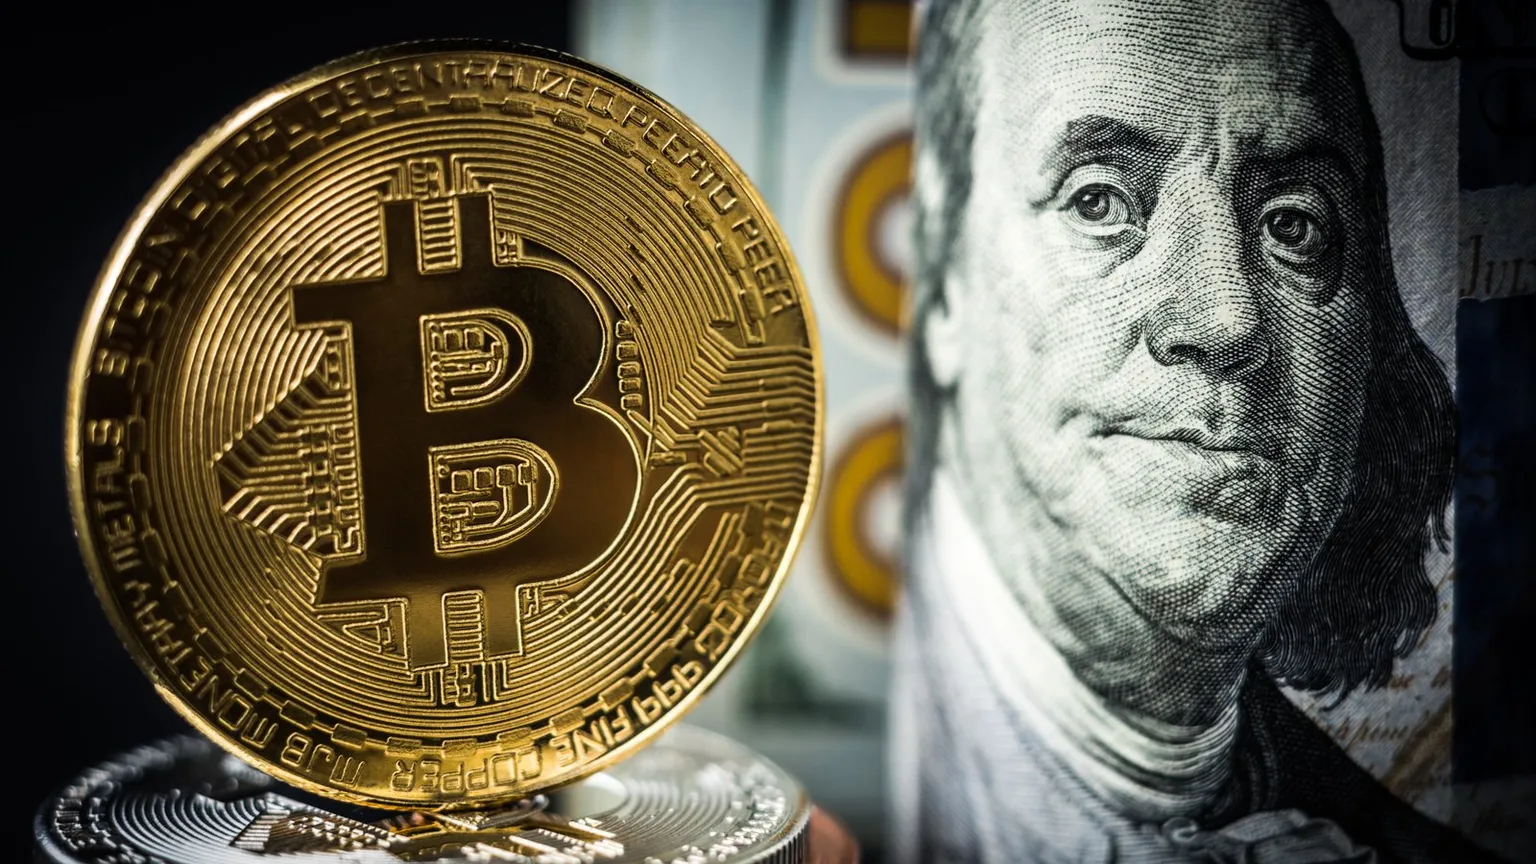 Bitcoin and the U.S. dollar. Image: Shutterstock